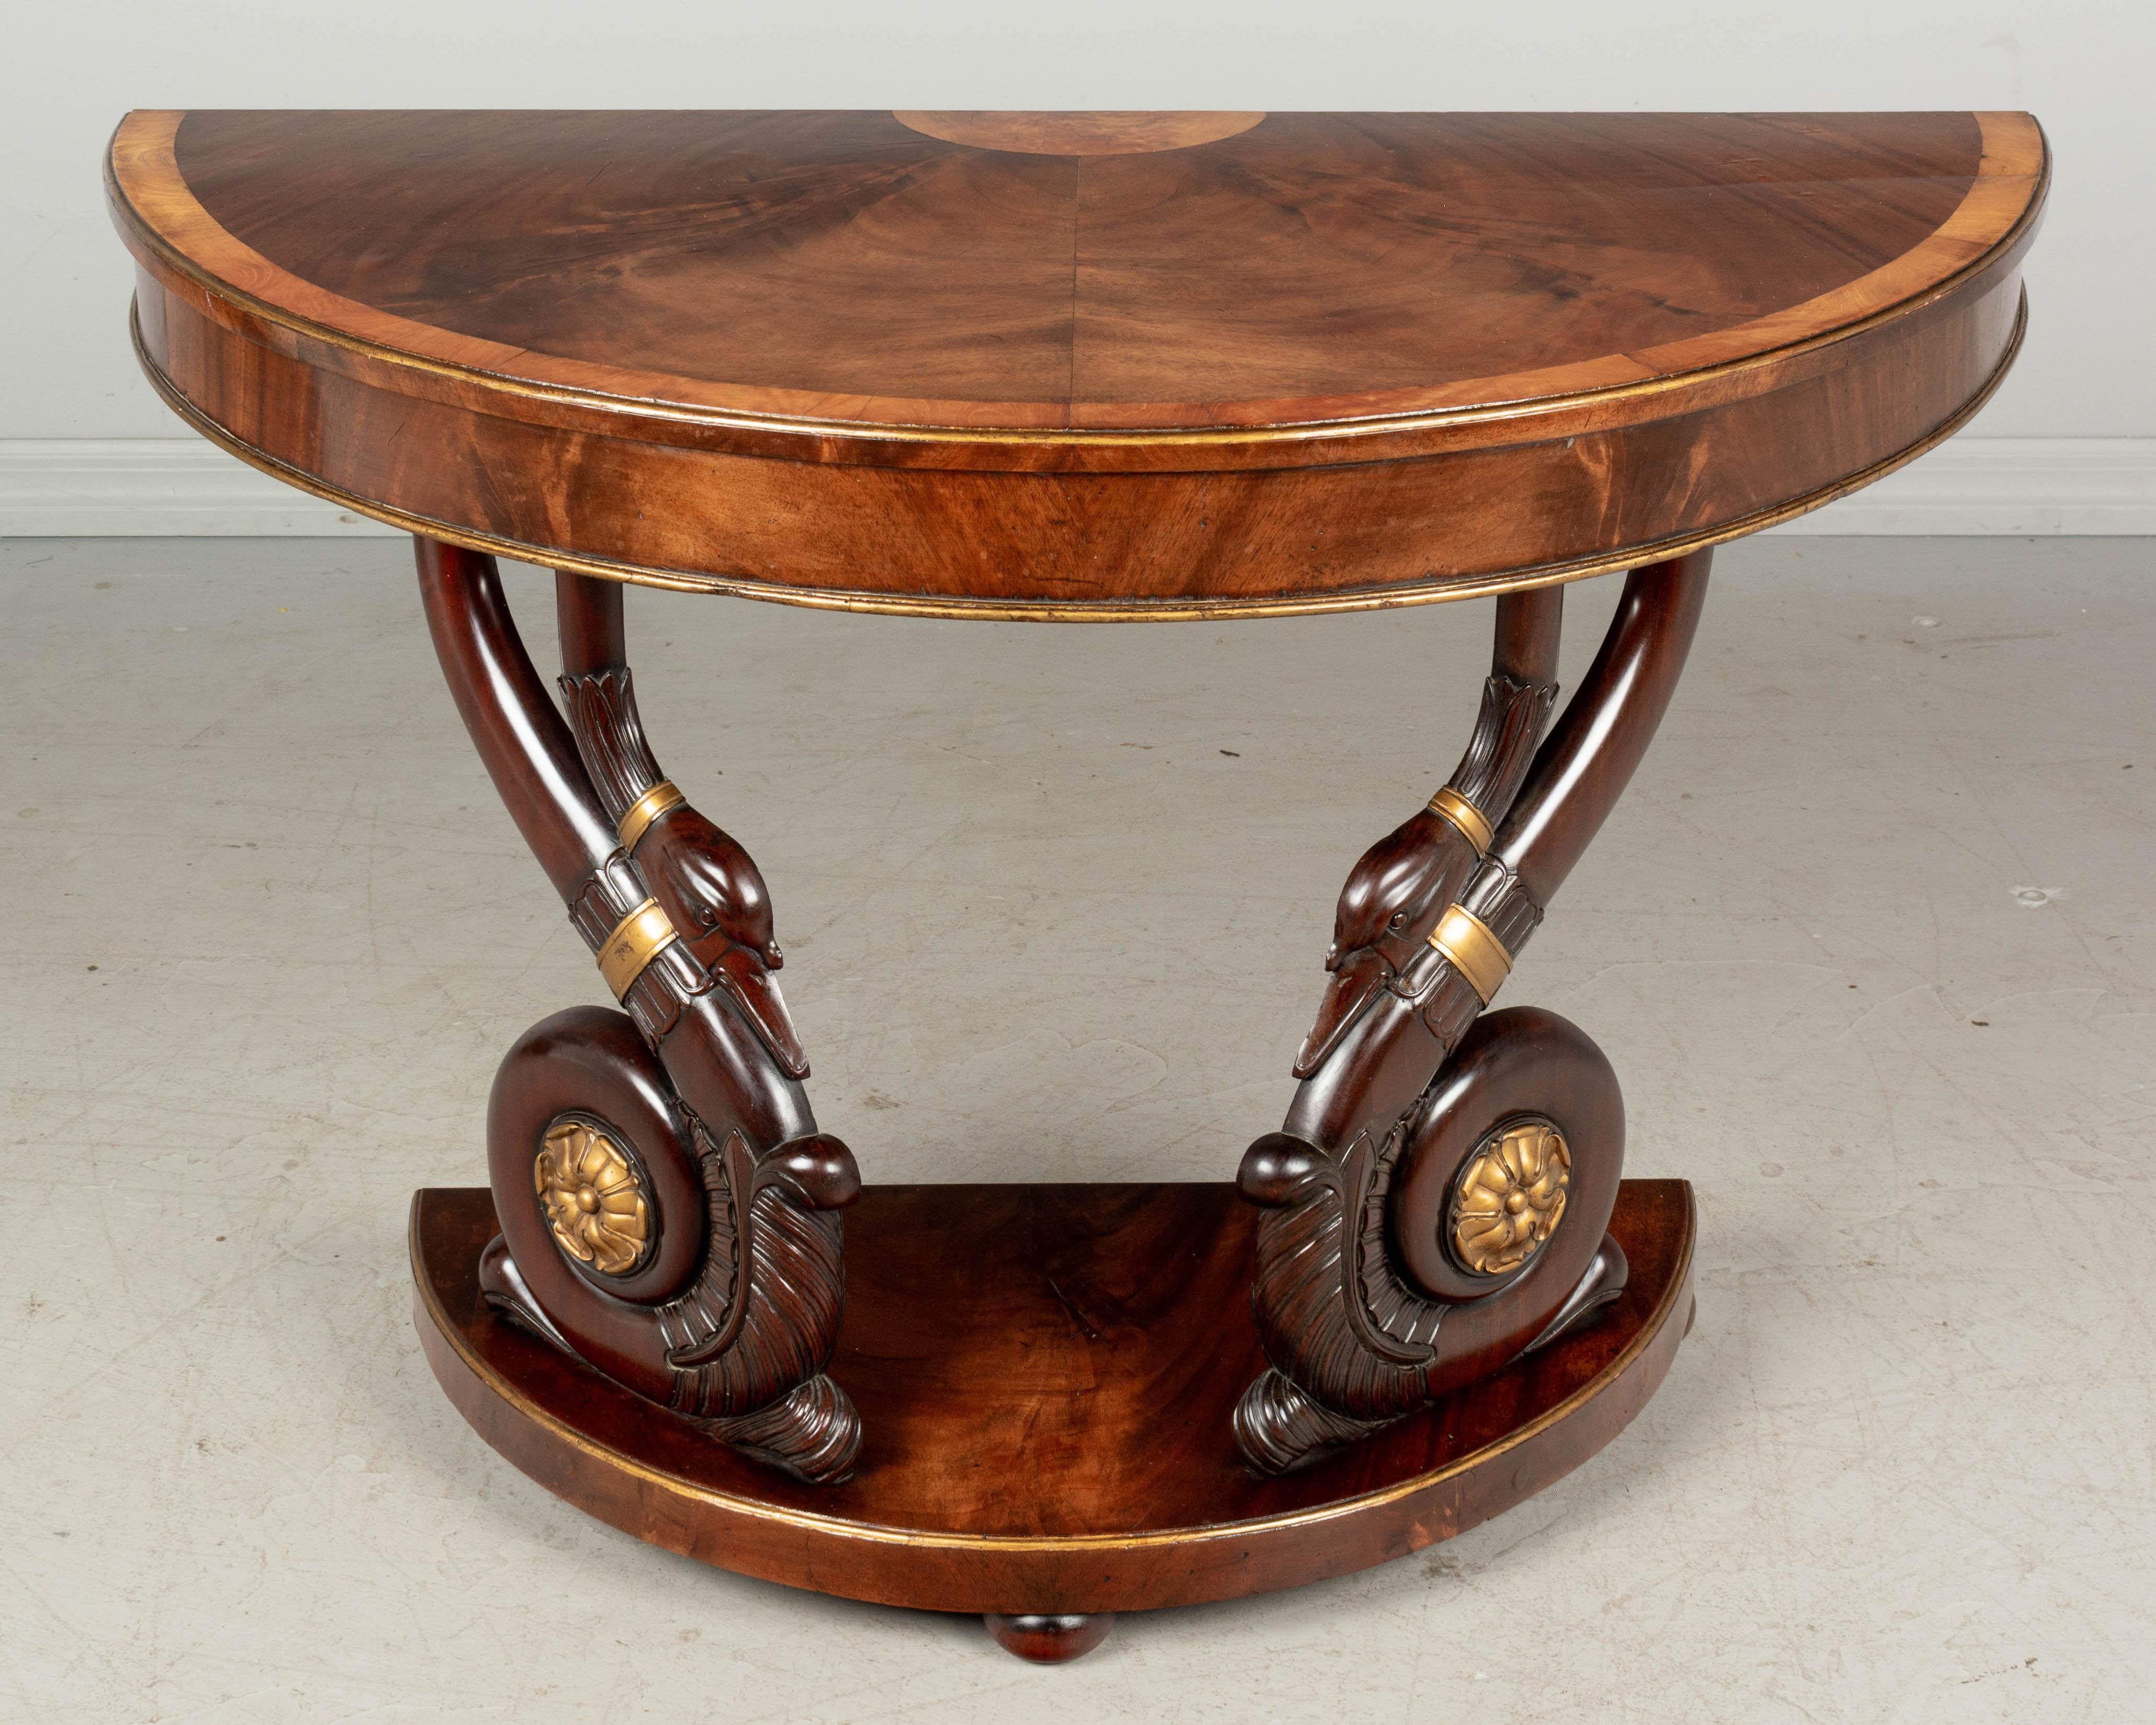 A French Empire demilune console table with a pair of large hand-carved mahogany swans. Good craftsmanship and beautiful stylized sculptural swans with smooth finish and gilt painted accents. Top and base made of veneer of mahogany with book matched